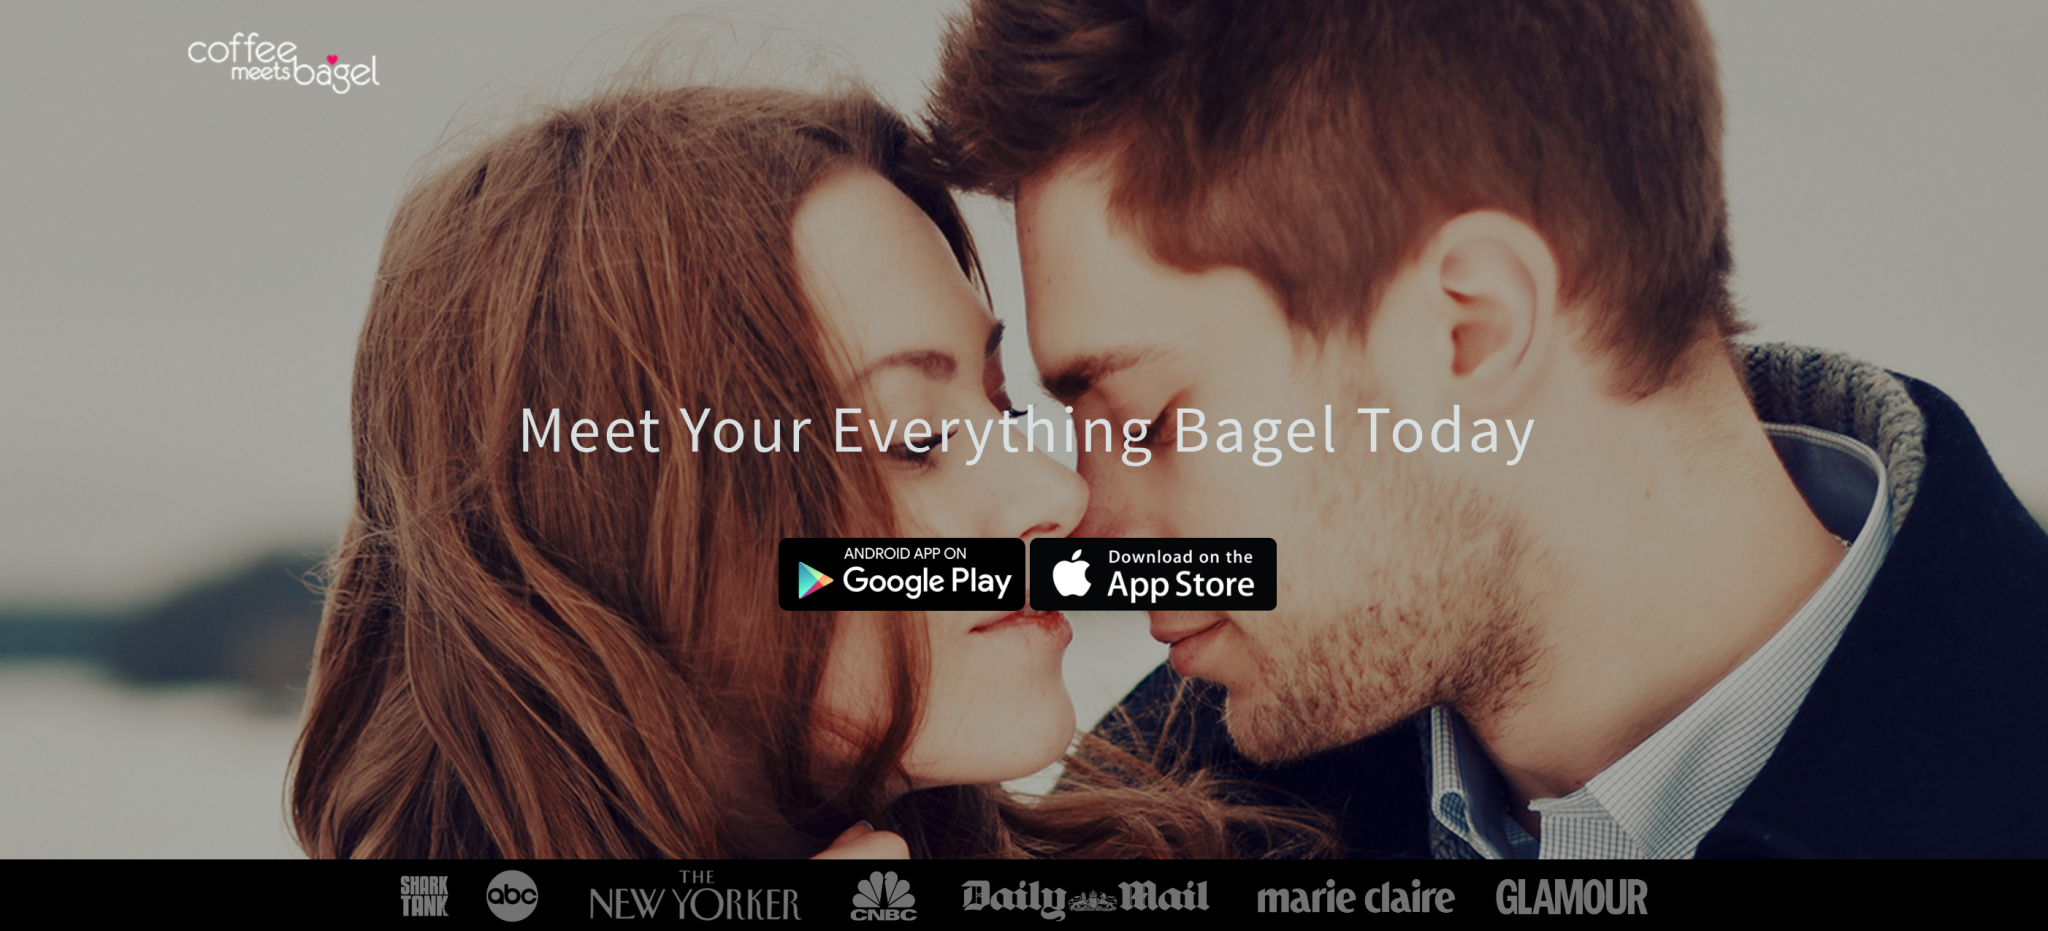 Coffee meets bagel vs bumble christian dating